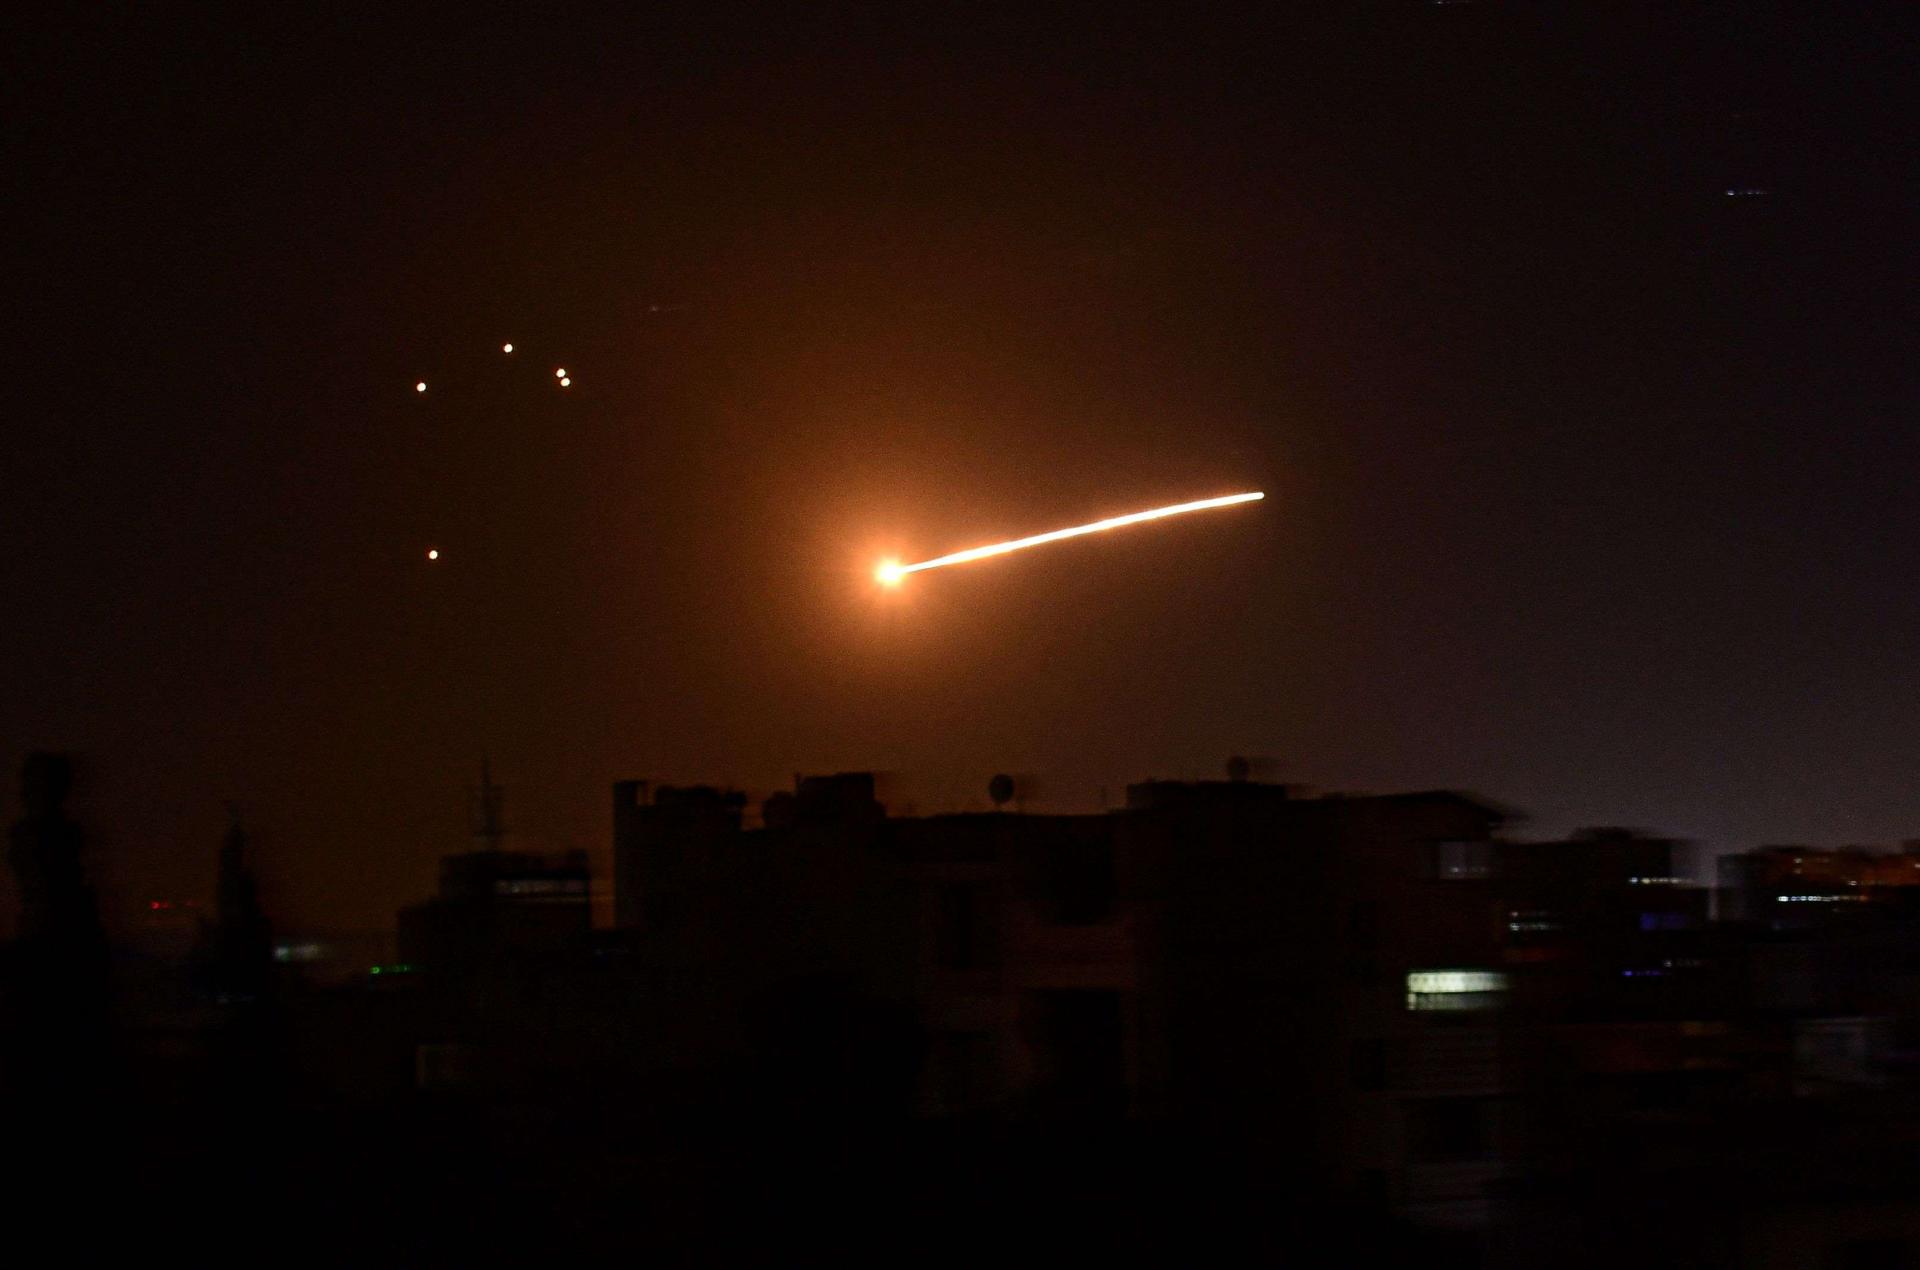 Since the start of the Syrian conflict in 2011, Israel has carried out hundreds of strikes in the country